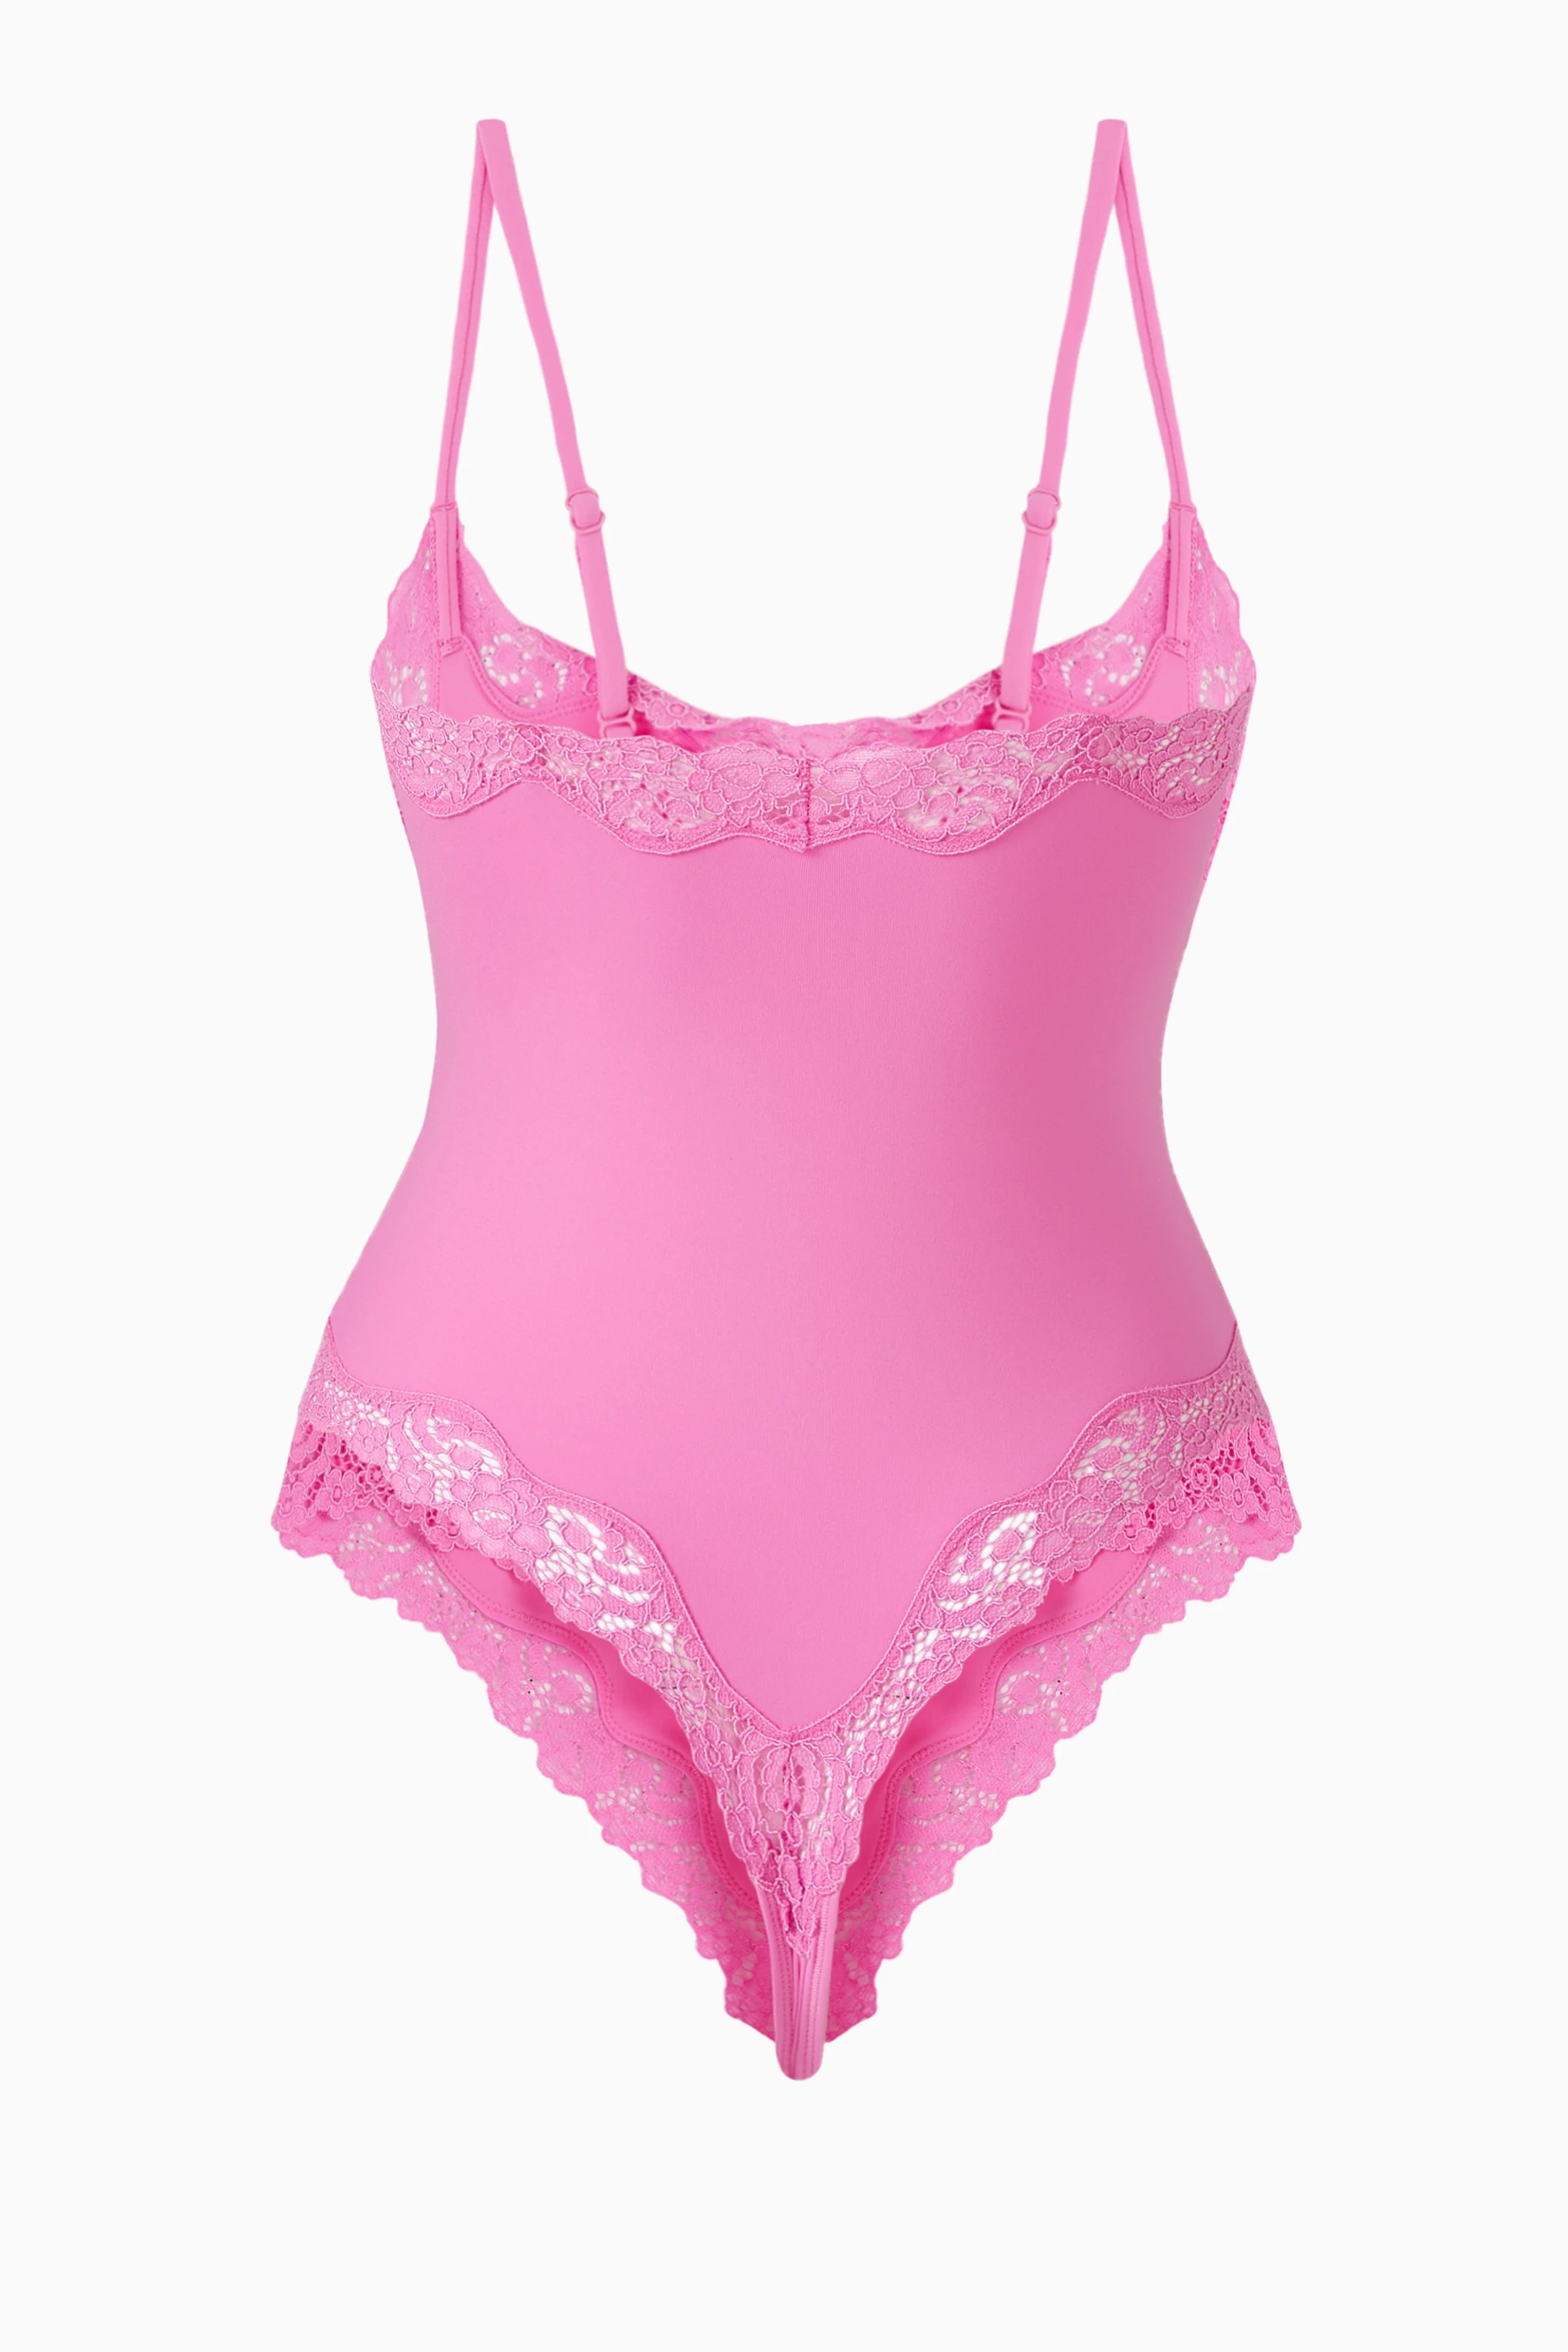 Skims fits everybody lace bodysuit in neon orchid from the